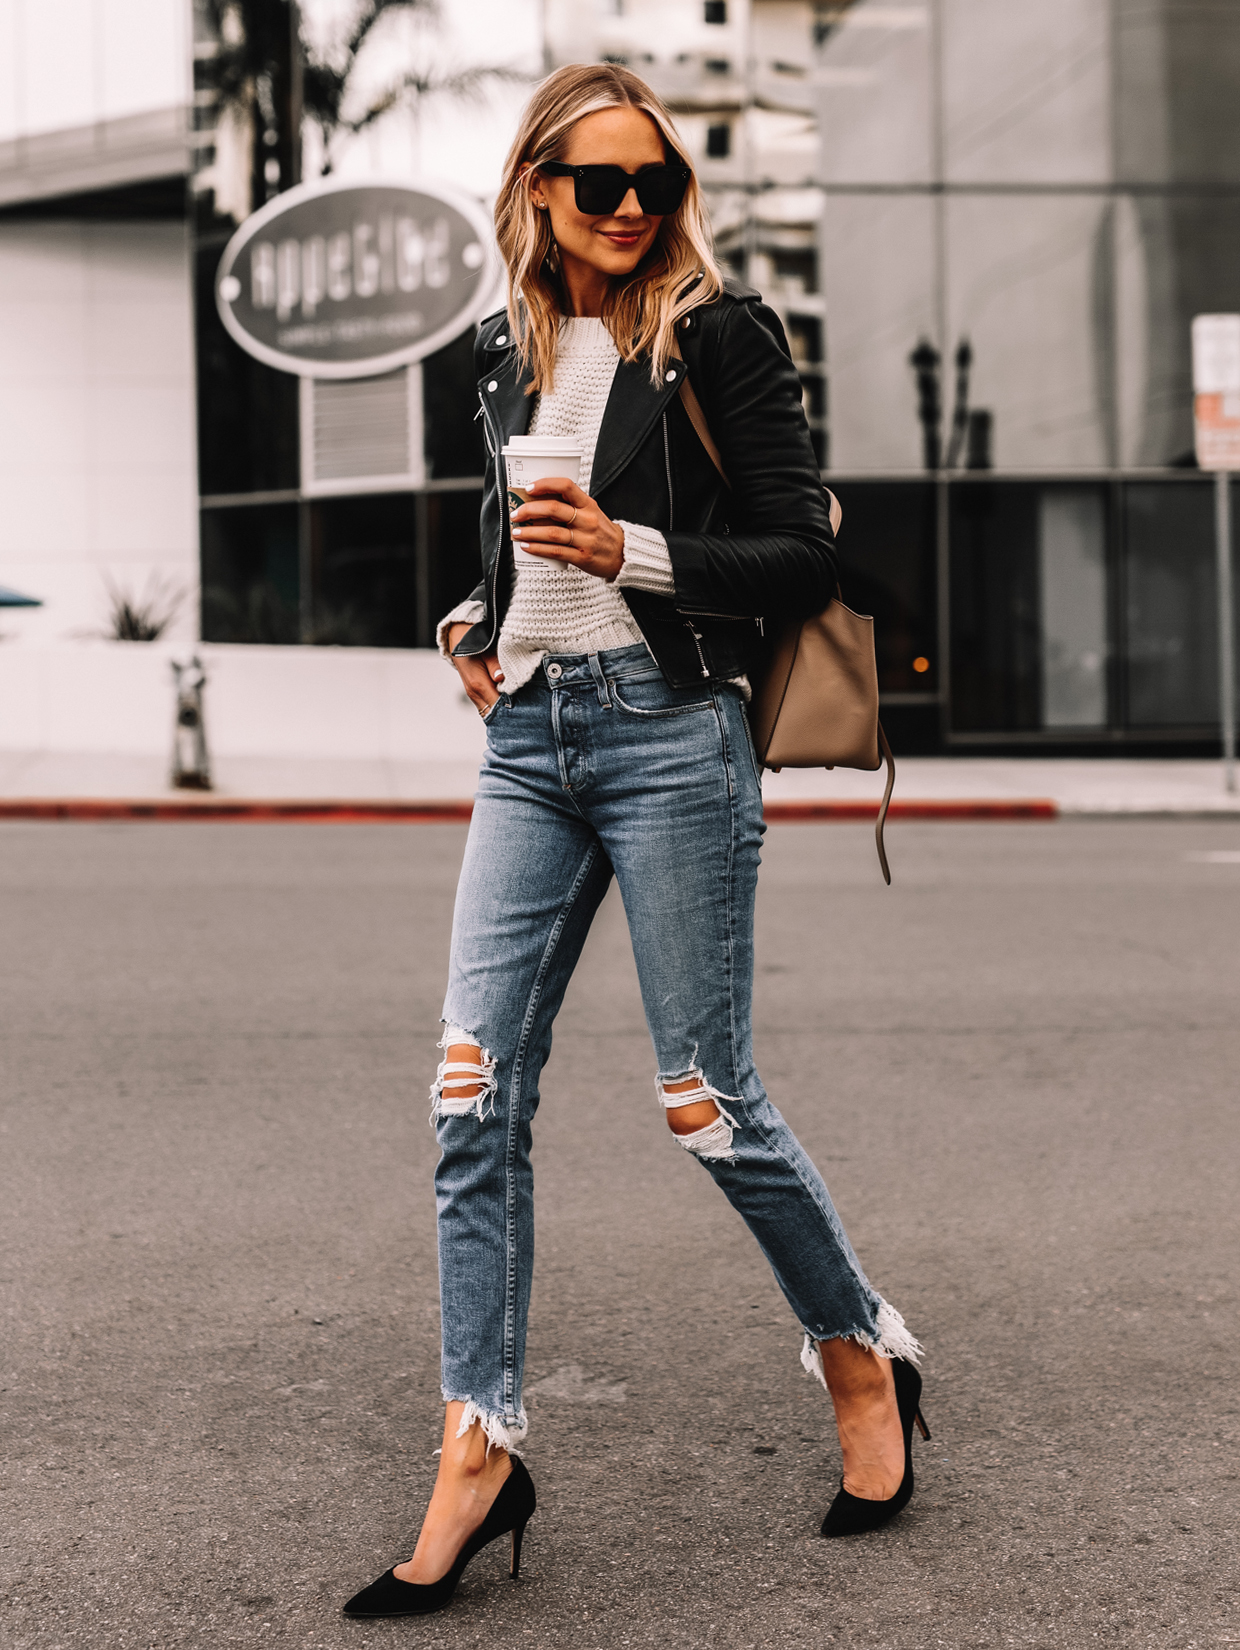 Leggings Under Ripped Jeans Still In Style In 2020?  Women jeans, Perfect  winter outfit, Womens ripped jeans